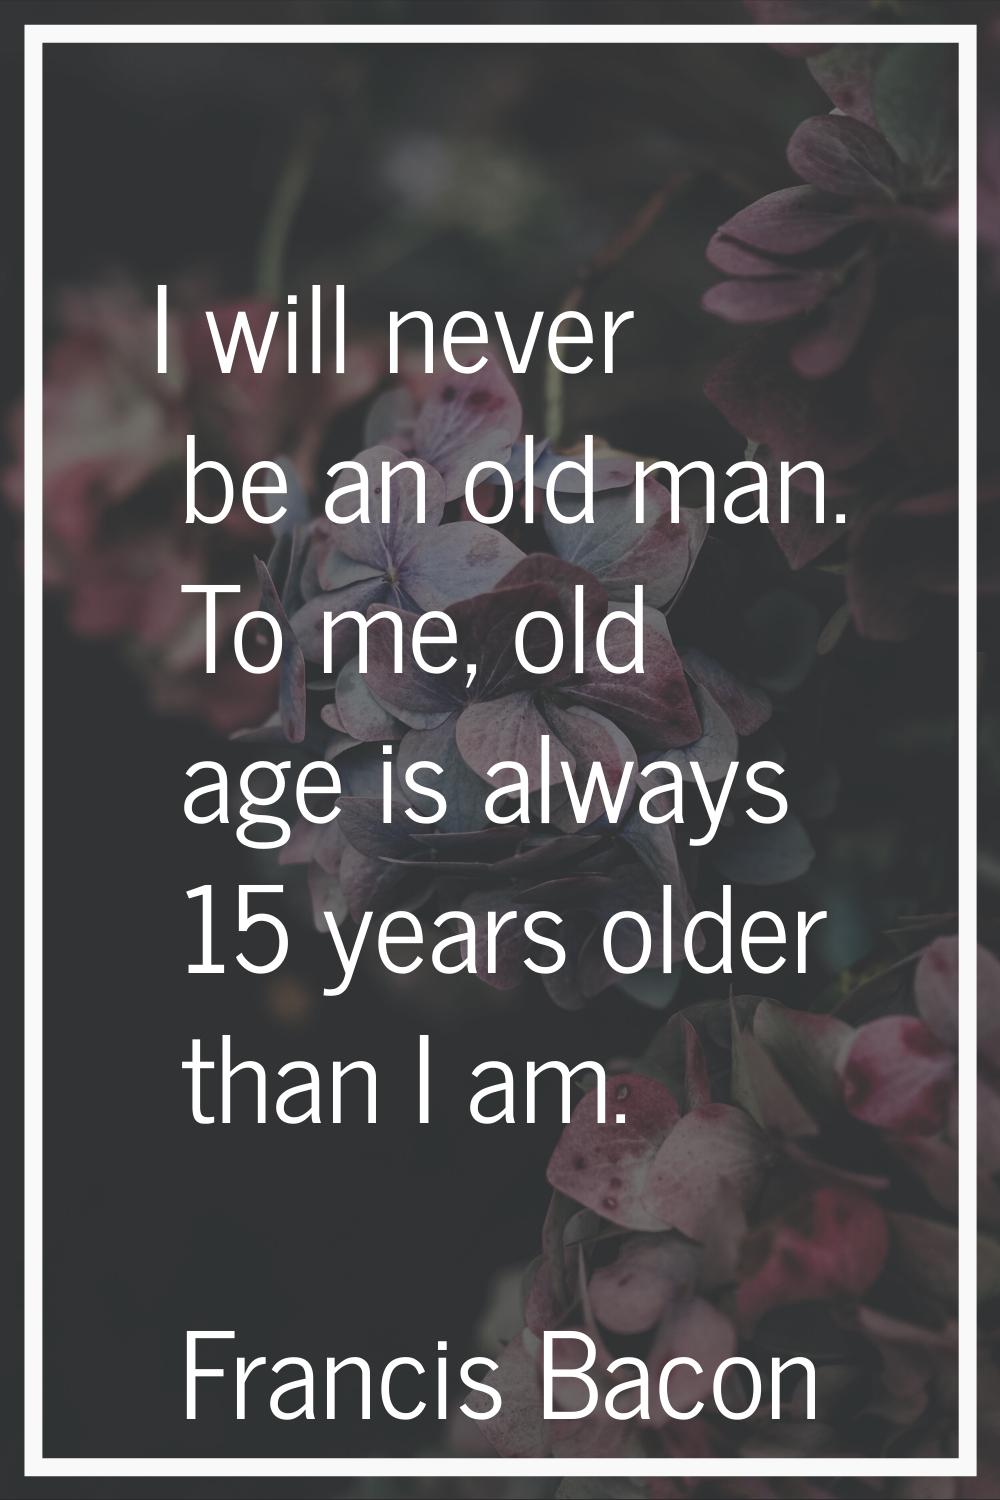 I will never be an old man. To me, old age is always 15 years older than I am.